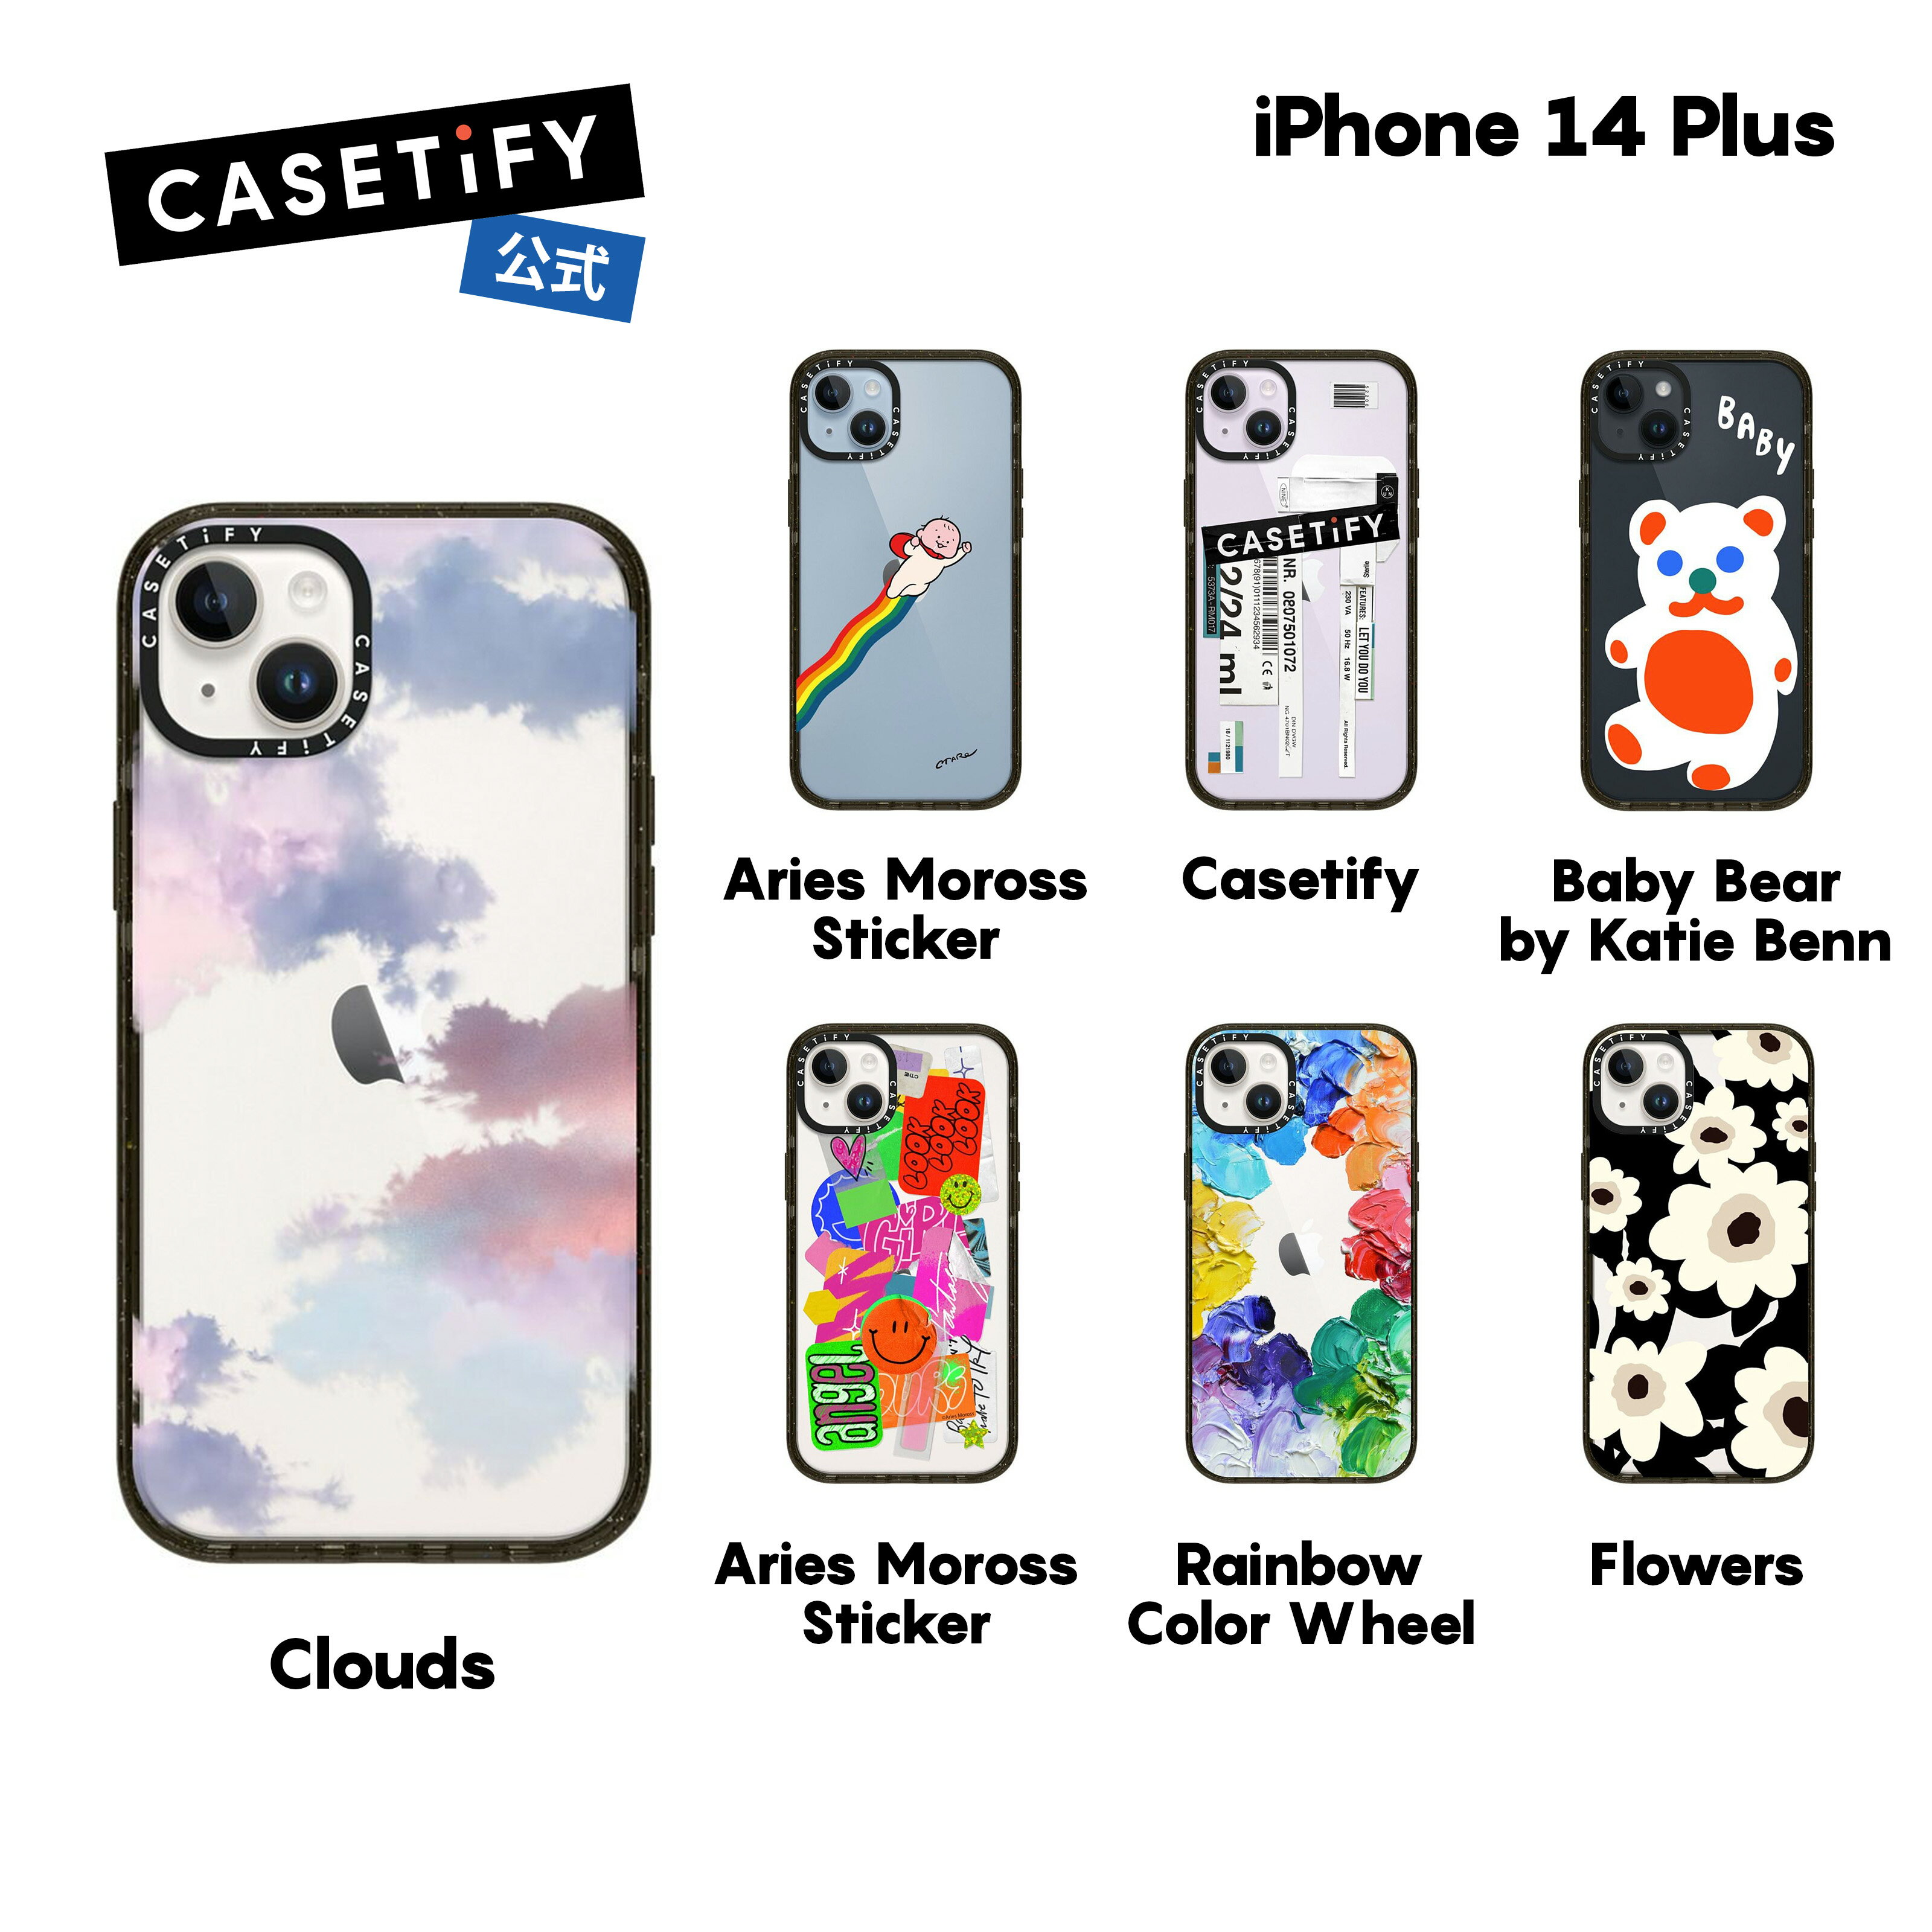 CASETiFY iPhone 14Plus インパクトケース クリア ブラック クリア フロスト Casetify Bunnies by foxy illustrations Flowers Rainbow Color Wheel PP-0008 iPhoneケース iPhone 14Plus 耐衝撃 保護ケース 透明